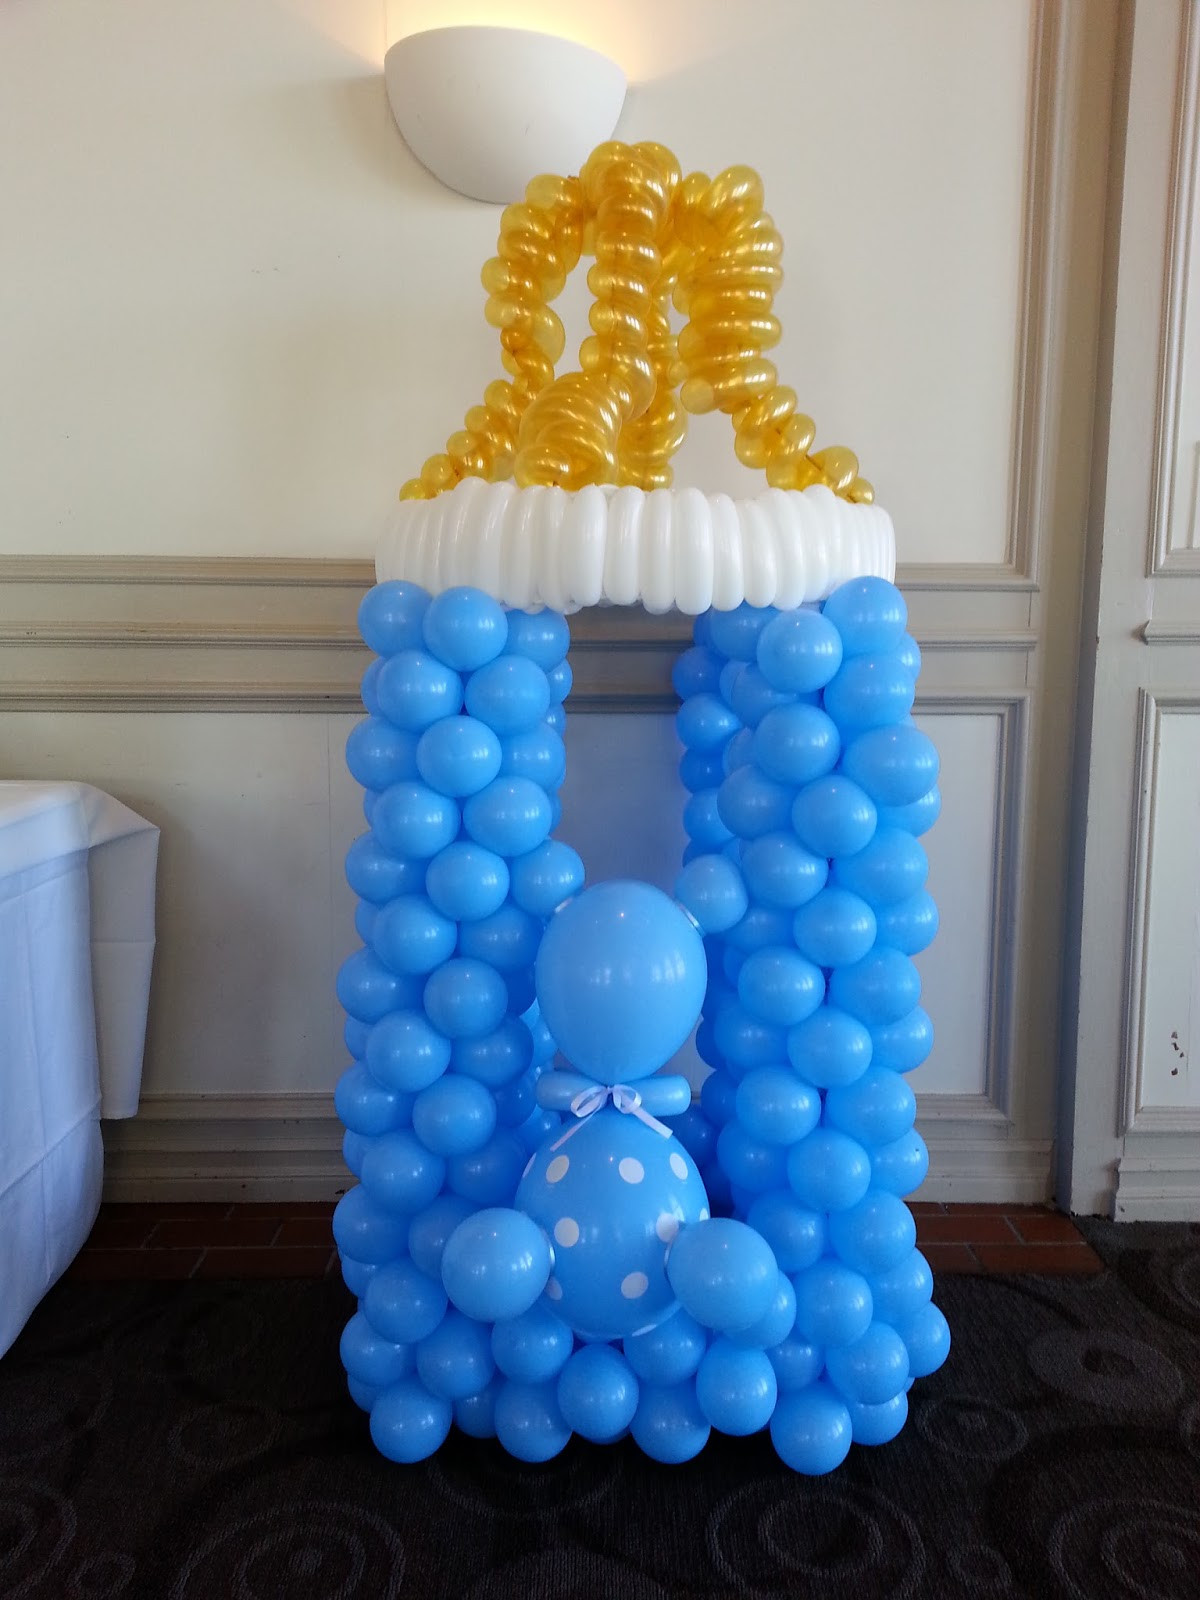 Decor For Baby Boy Shower
 PoP Balloons A baby shower for a boy